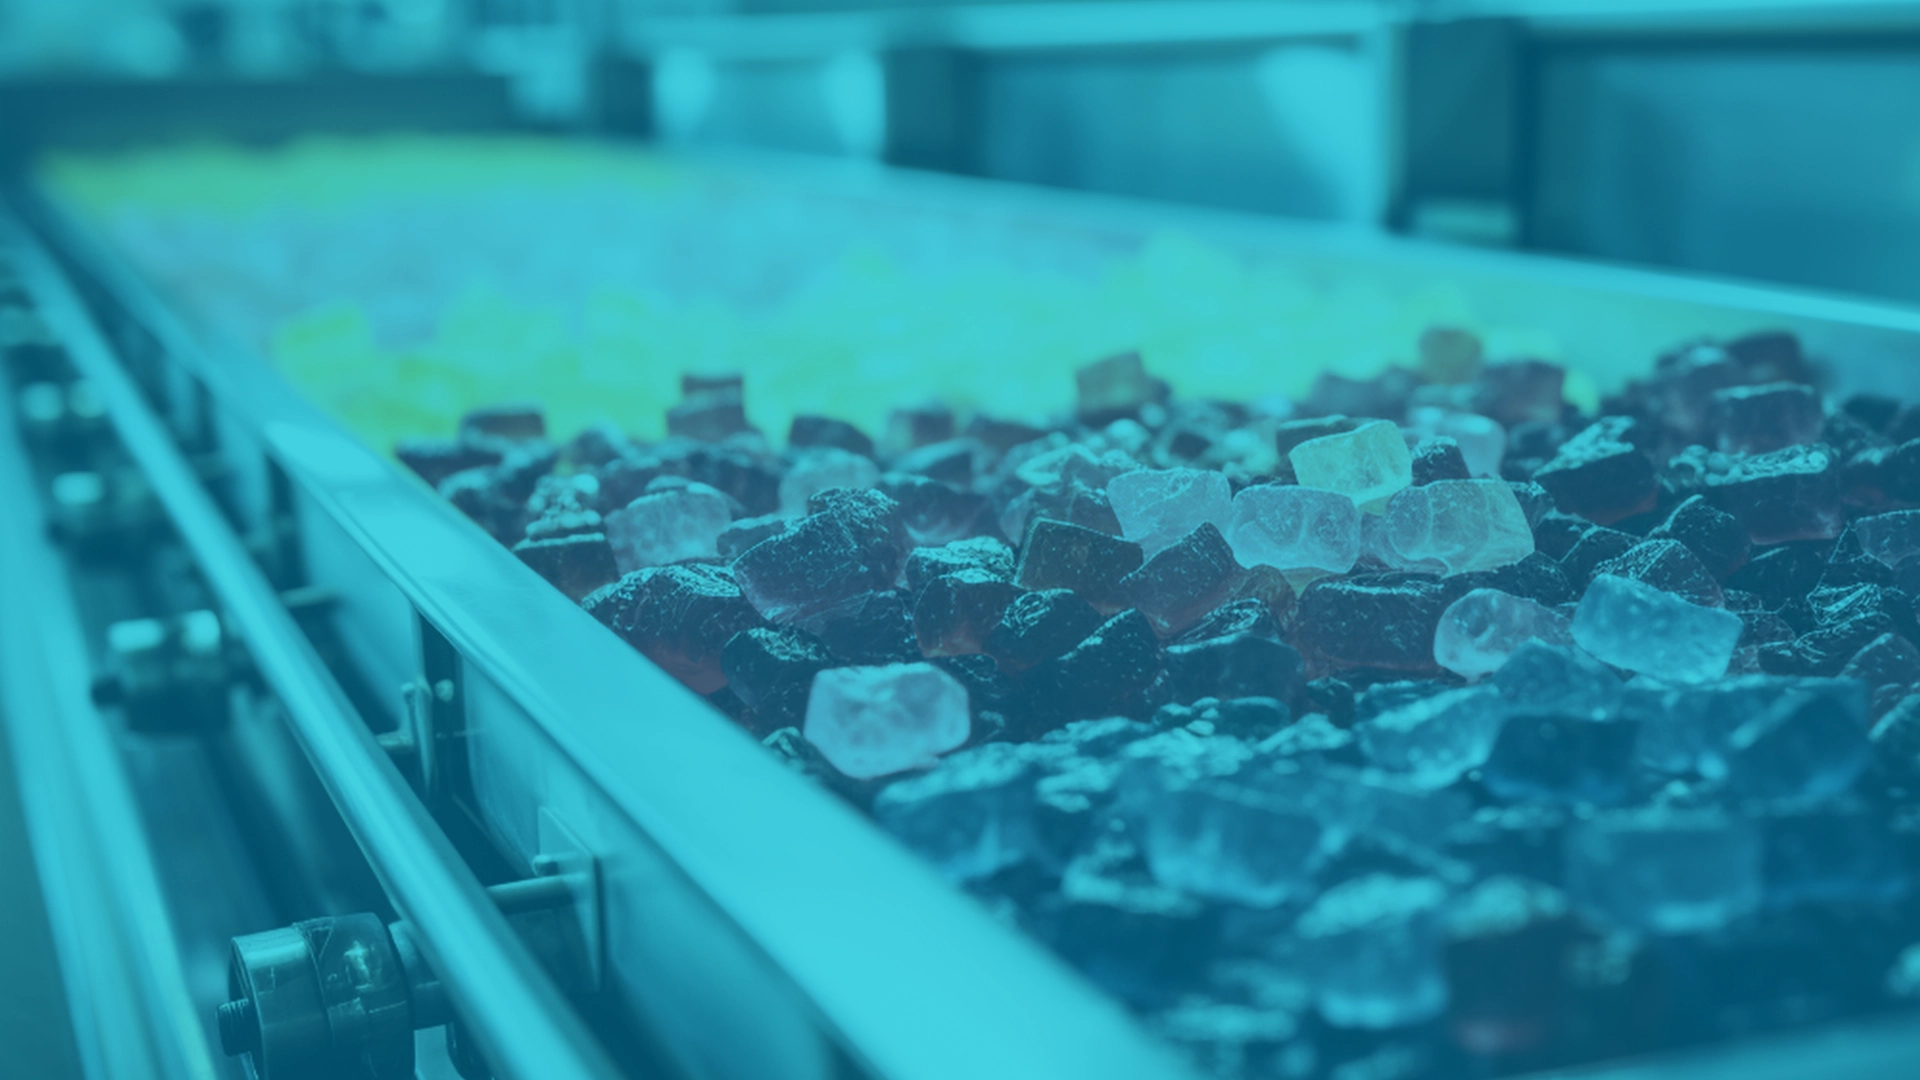 This is an image of gummy manufacturing for white label client needs in the CBD industry.